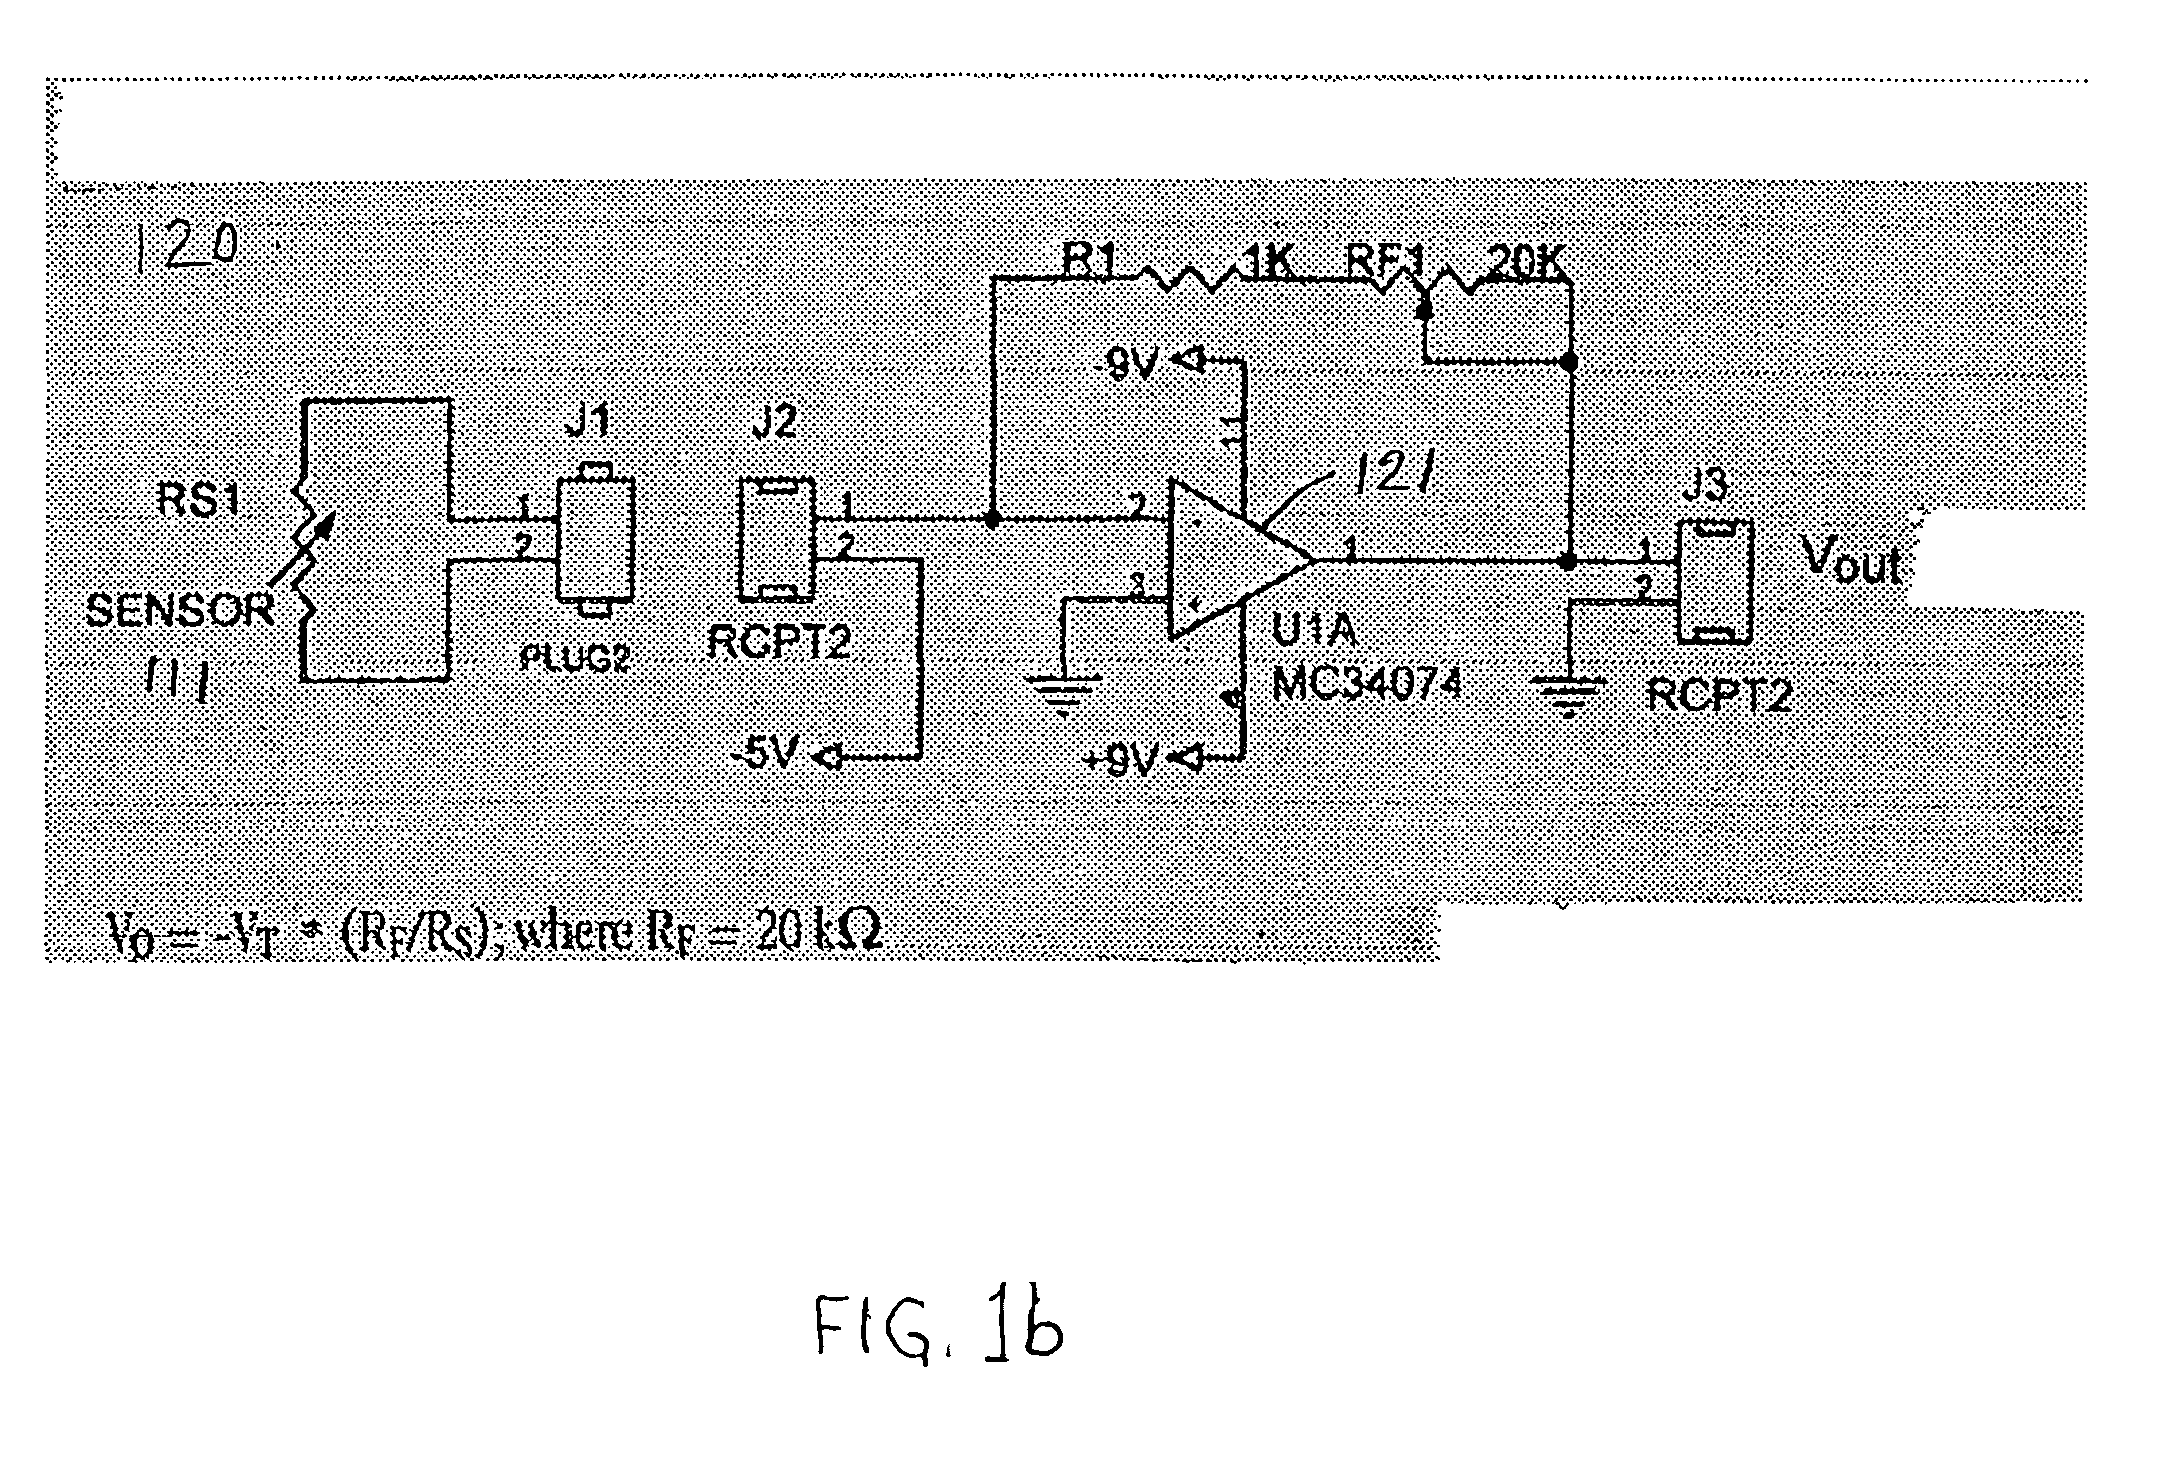 Tongue-operated input device for control of electronic systems